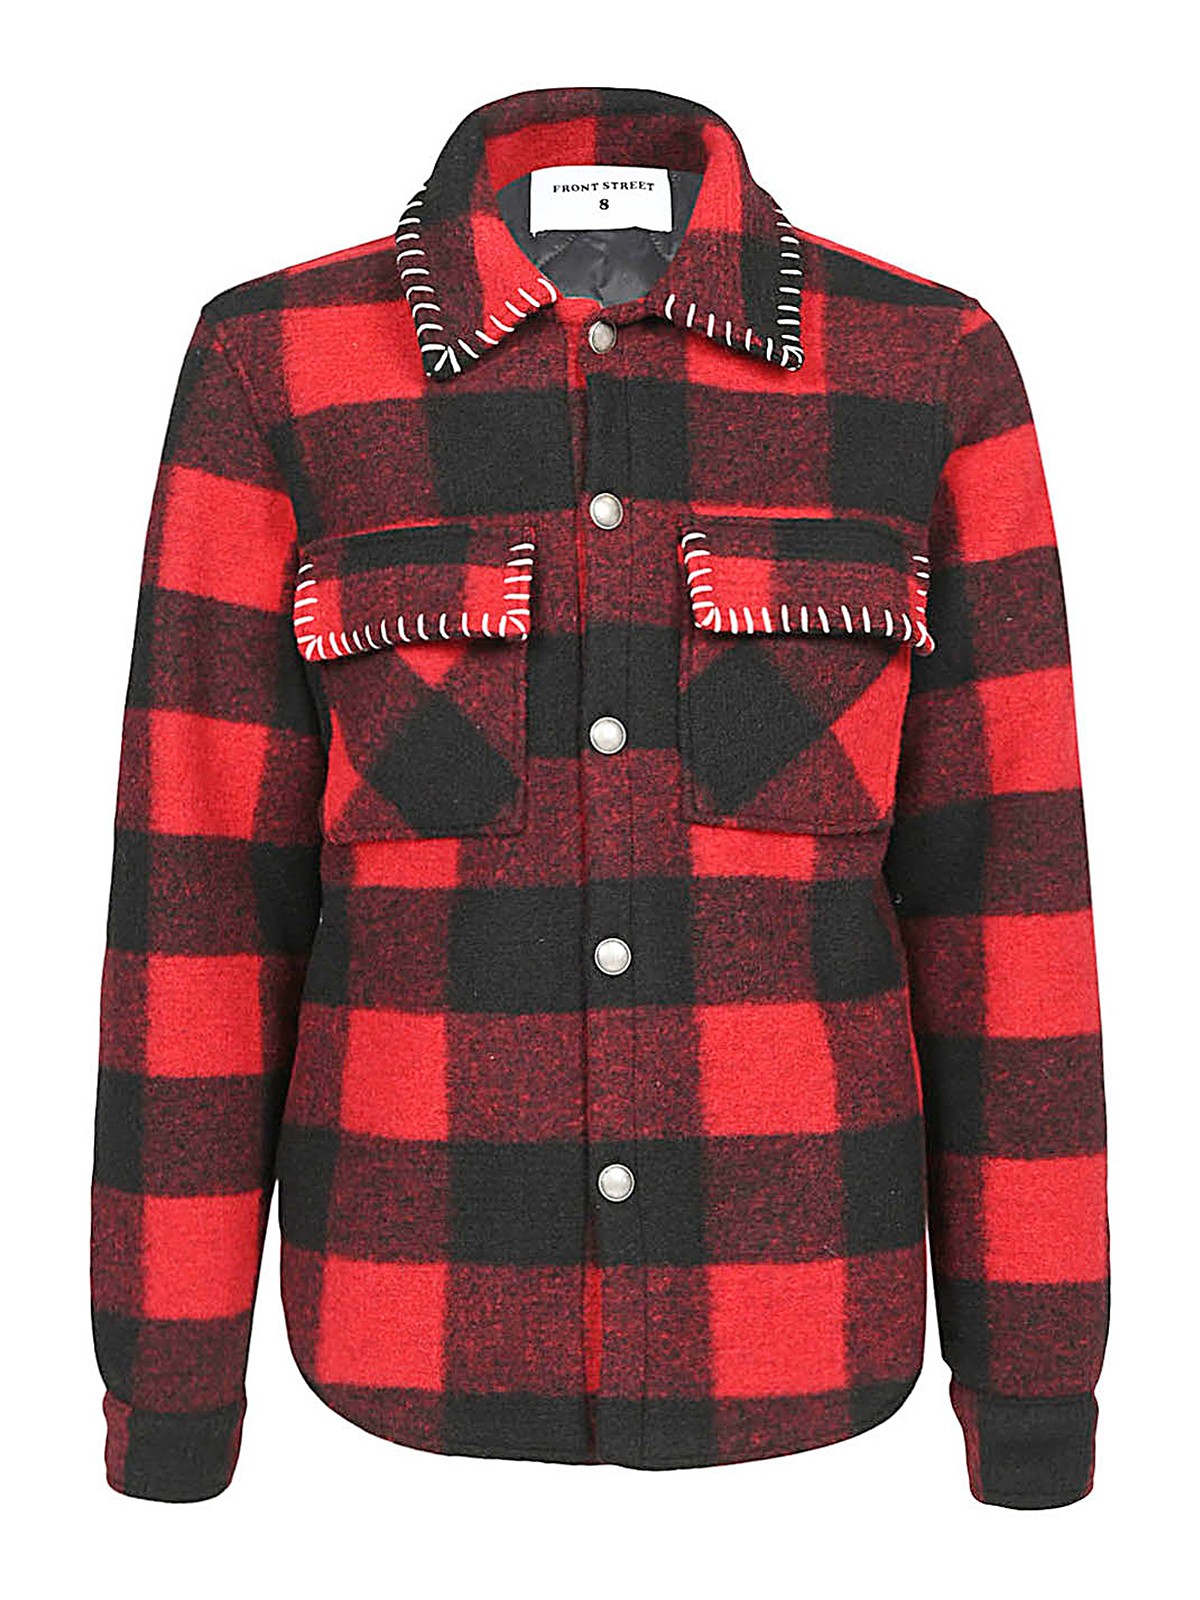 FRONT STREET 8 CHECKED OVERSHIRT